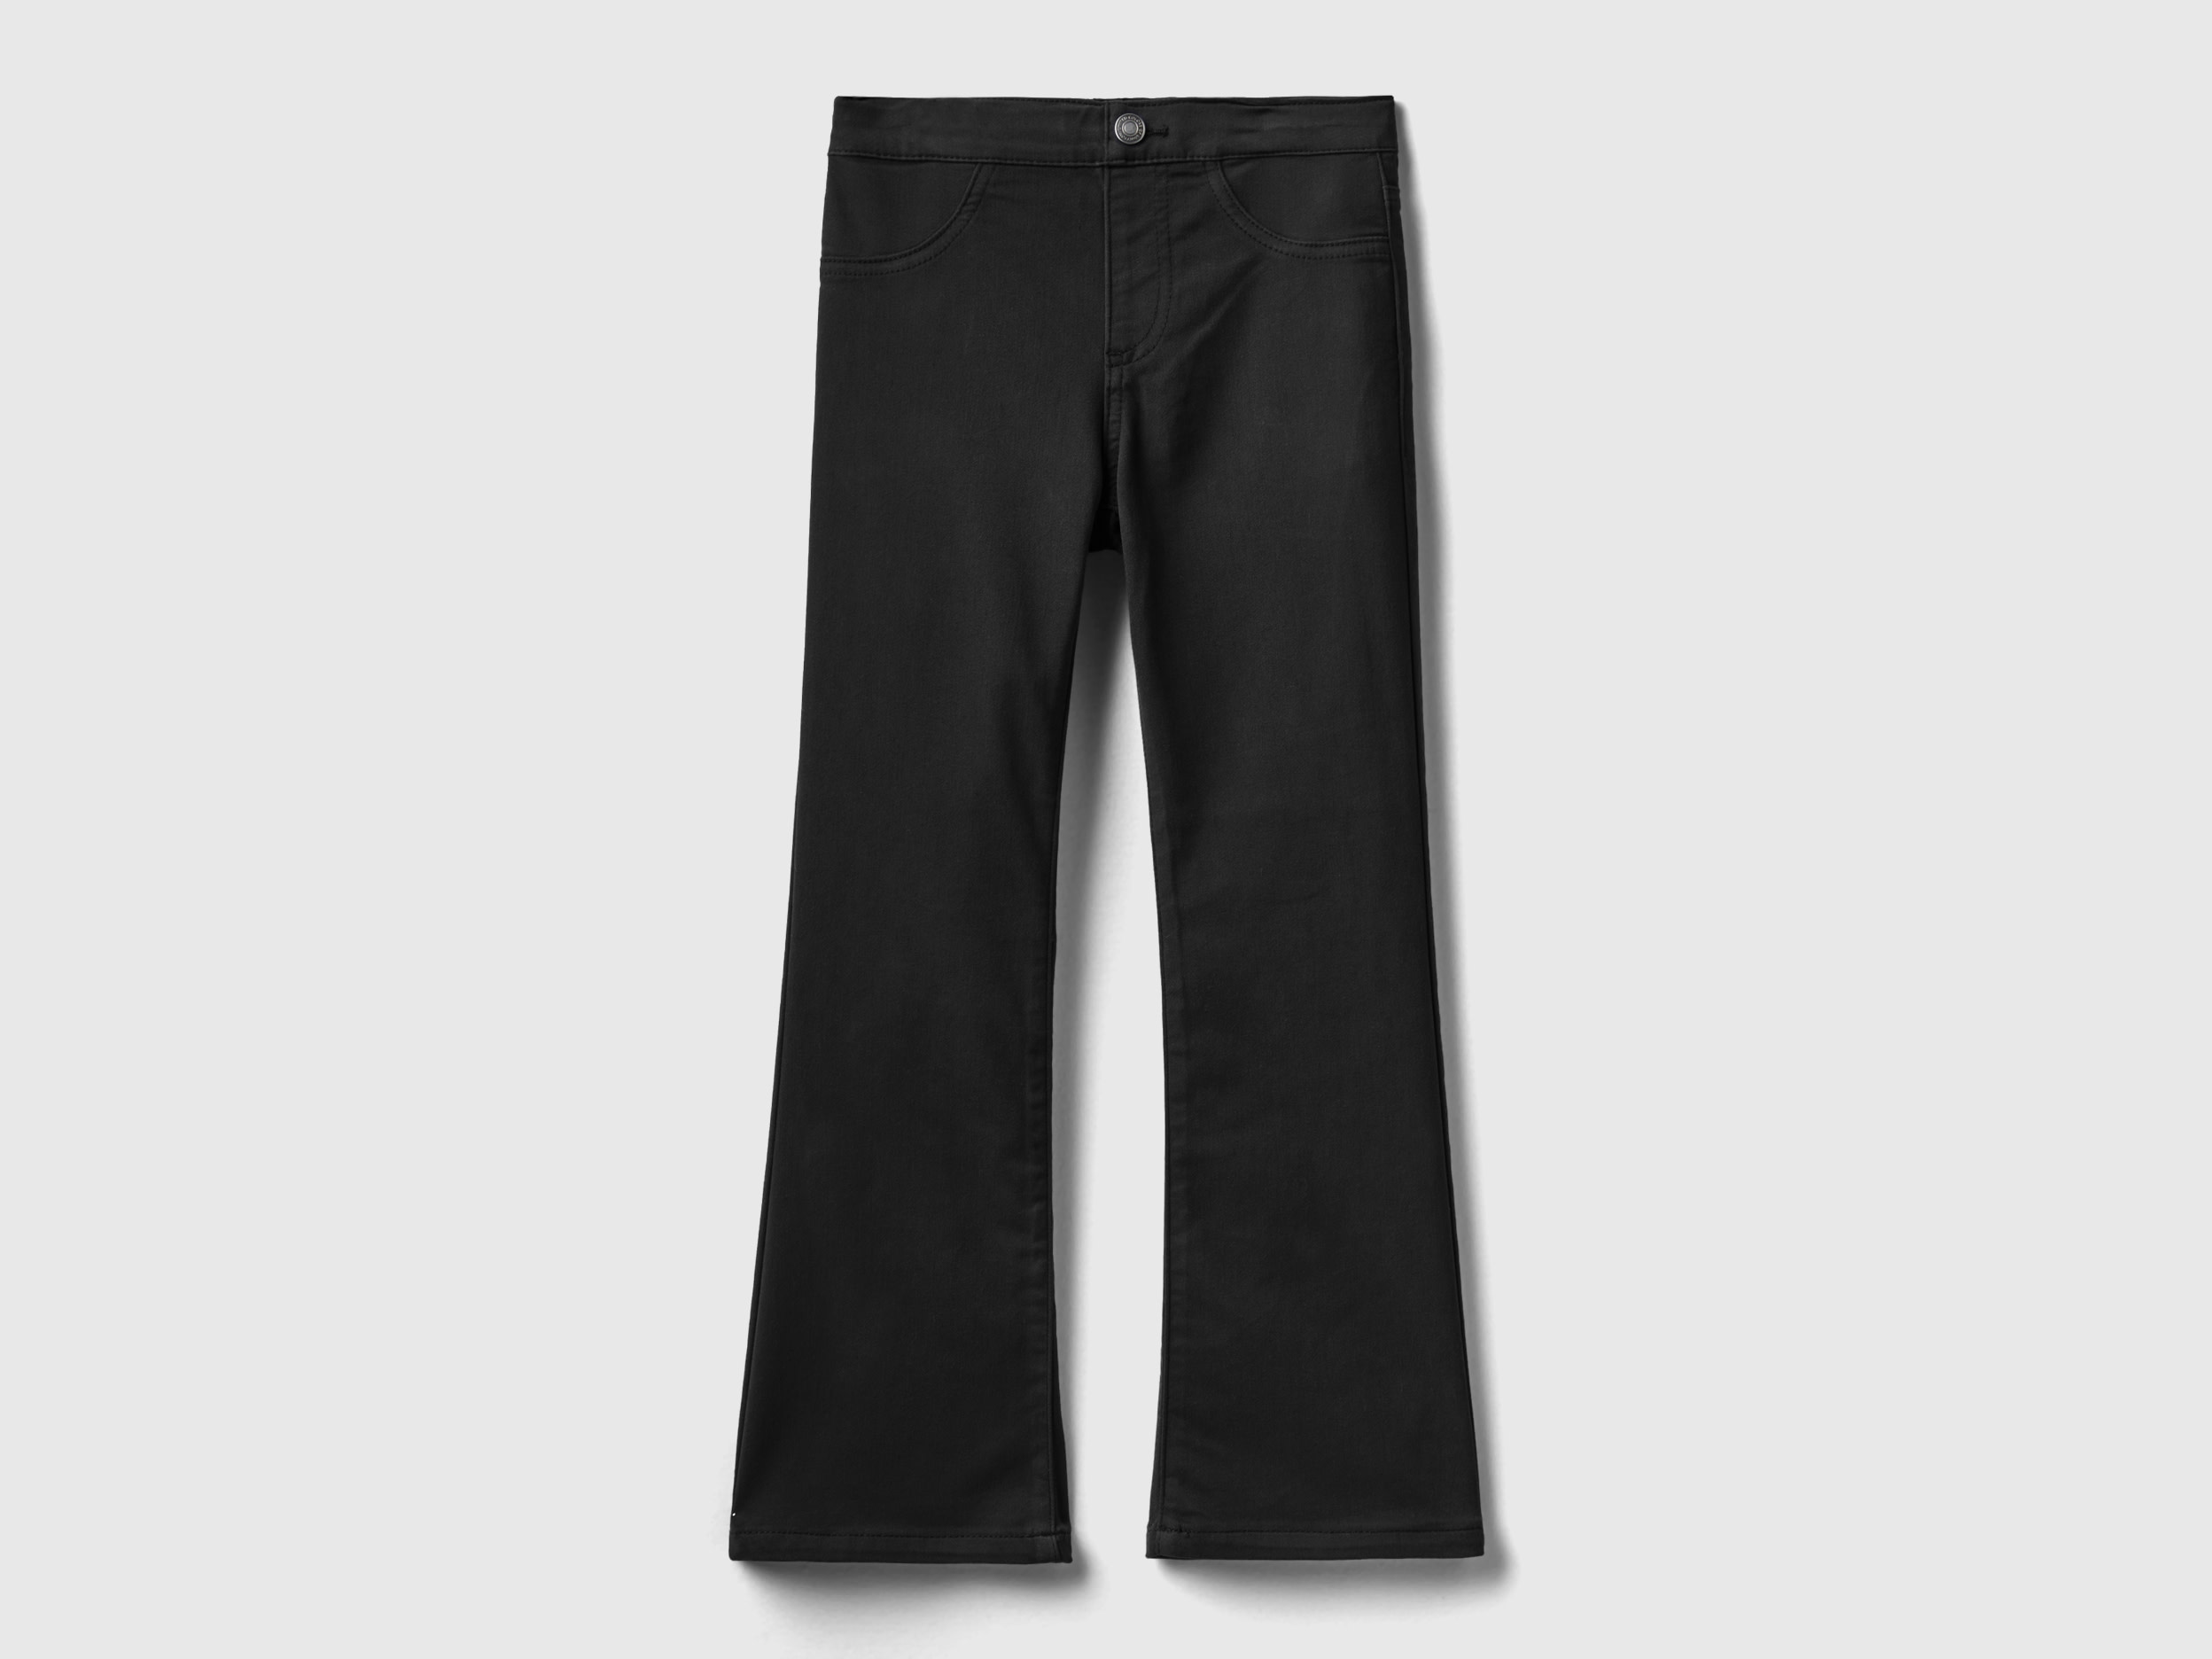 Benetton, Flared Stretch Trousers, size 3XL, Black, Kids